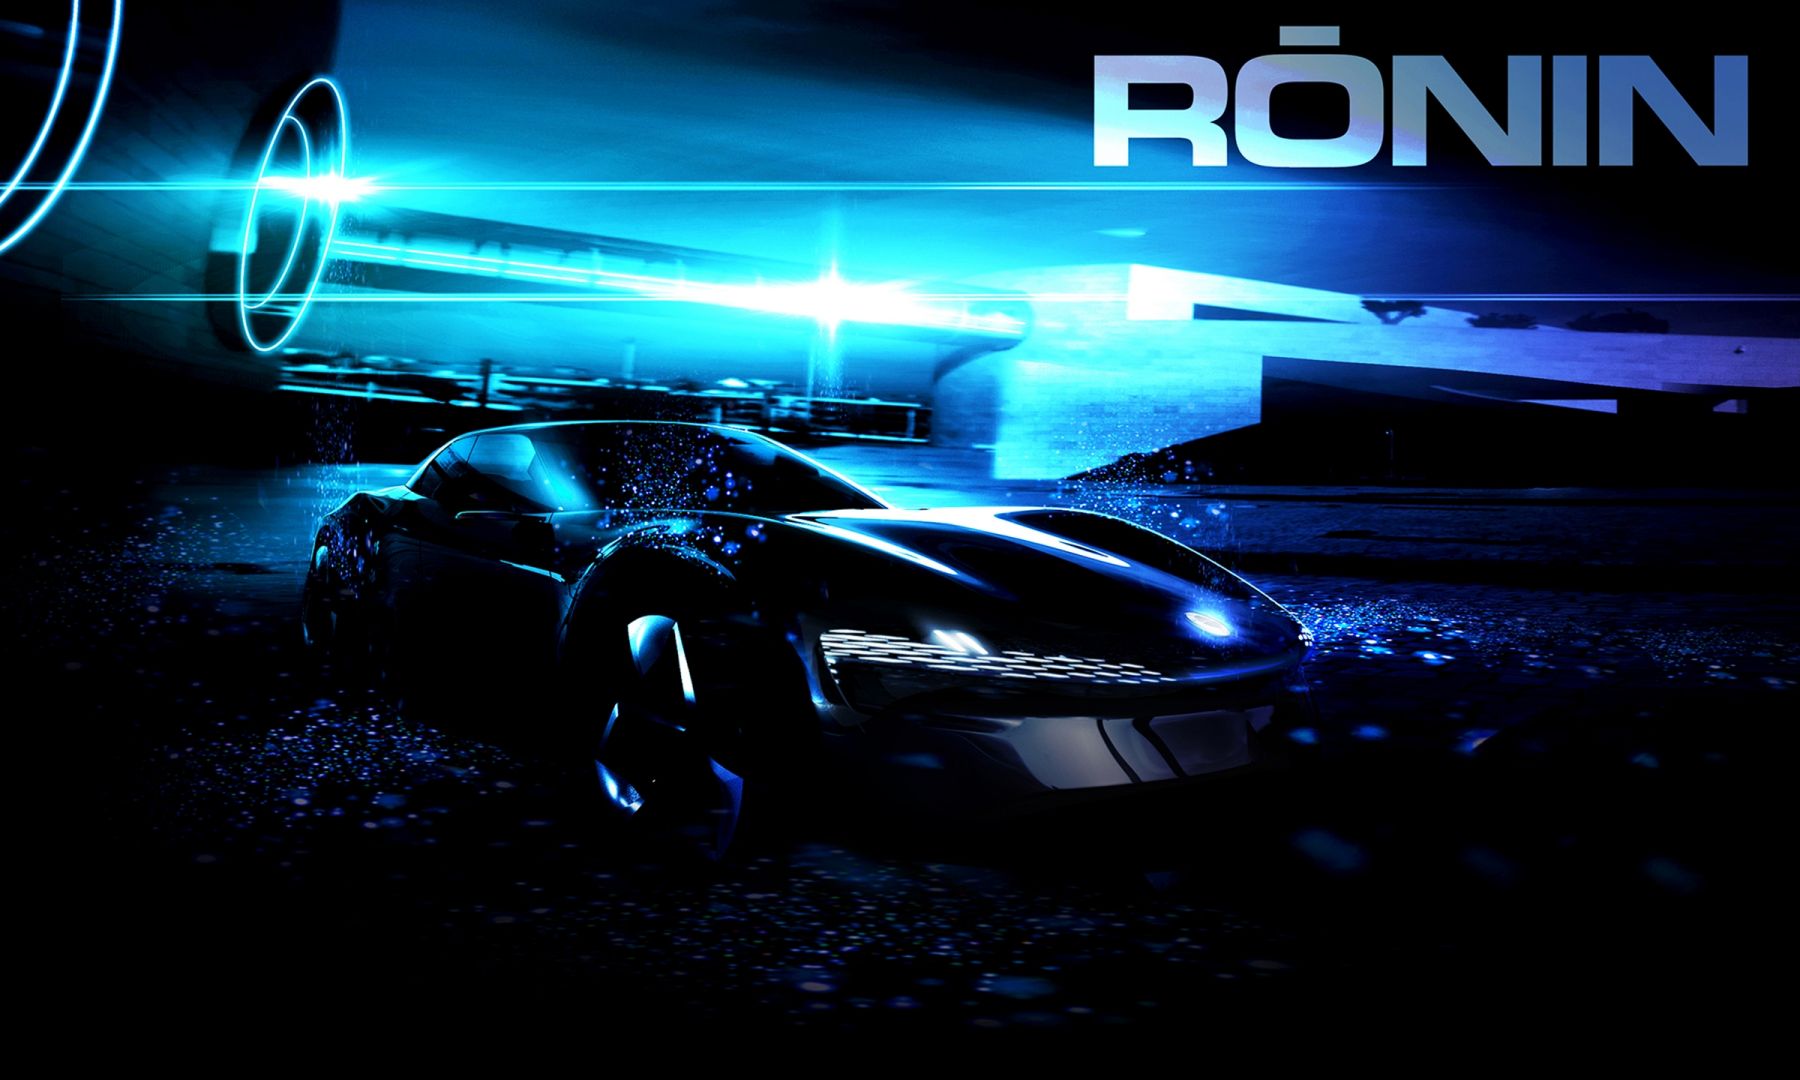 Fisker announced its third product, Project Ronin on PortalAutomotriz.com